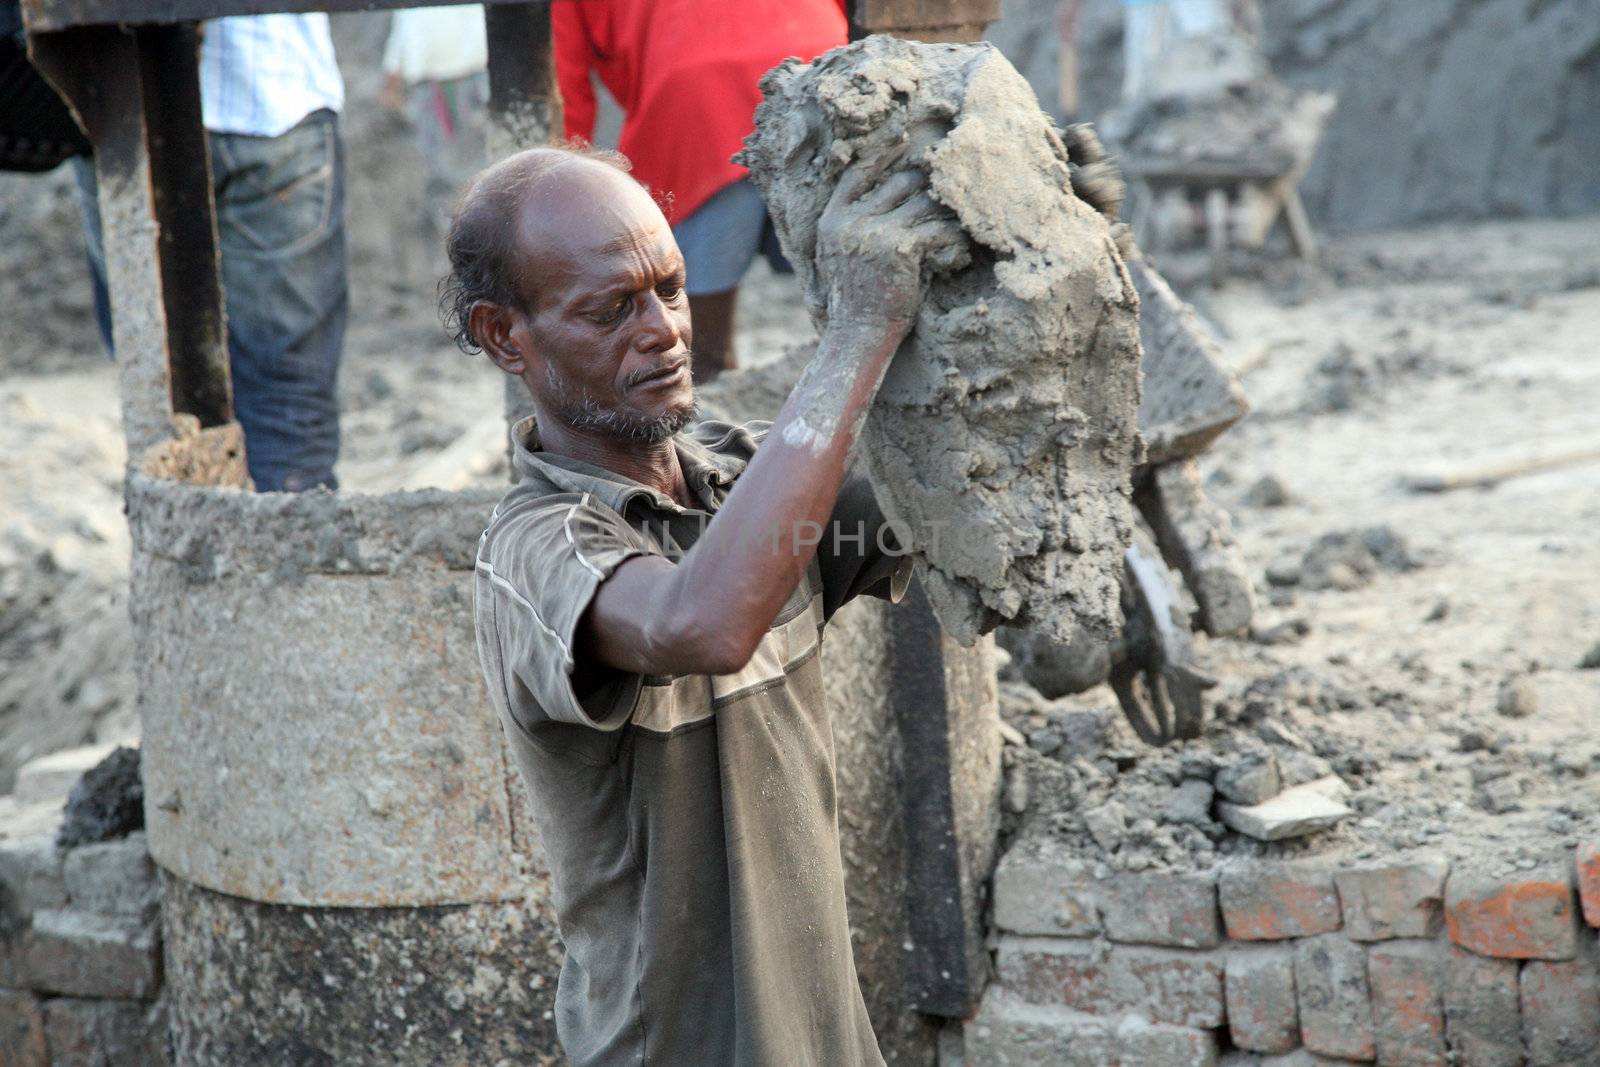 Laborers are carrying deposited soil for making raw brick by atlas